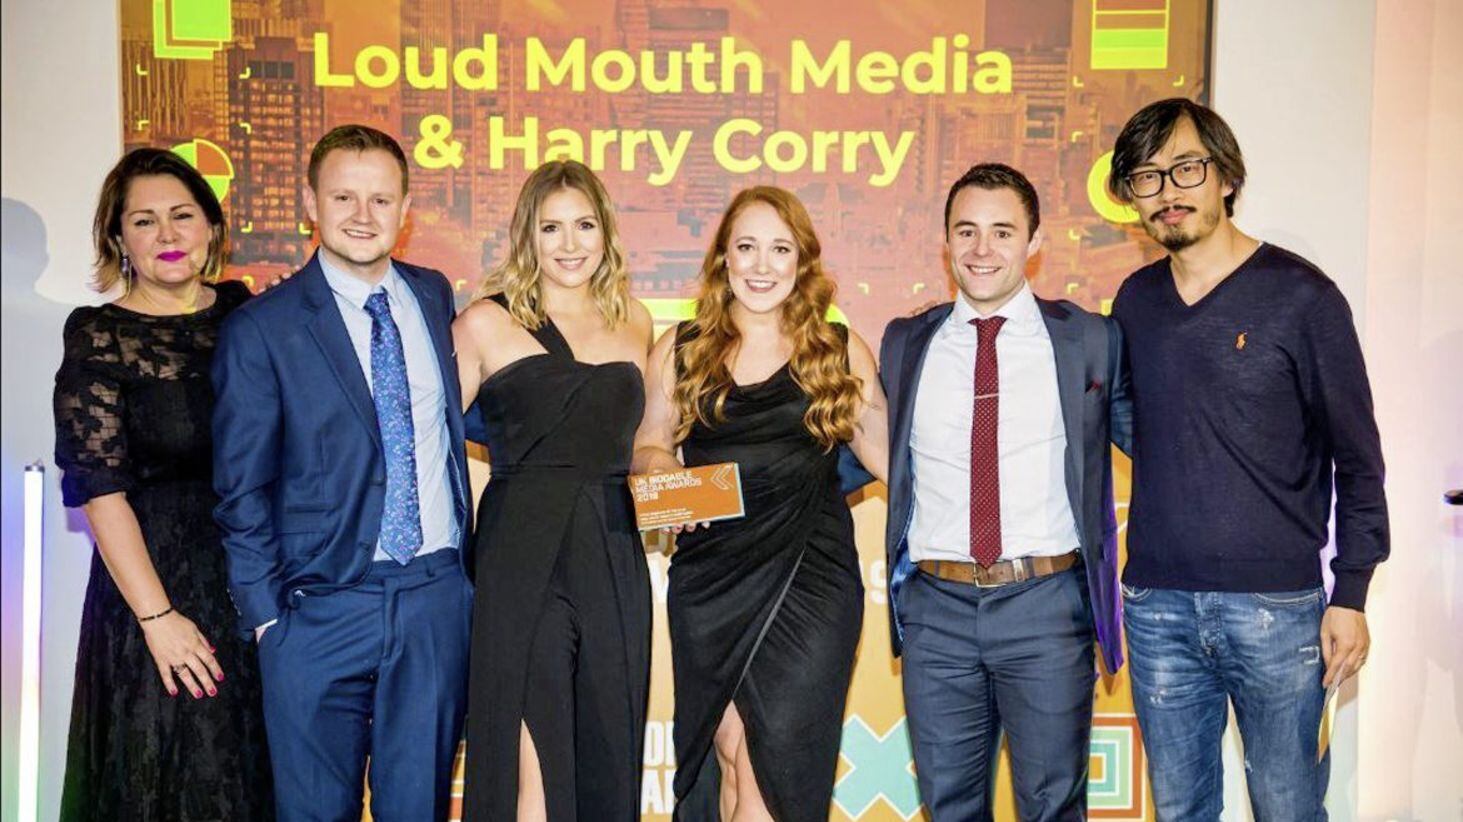 Celebrating the Loud Mouth Media award are (from left) Sam Walker, Kevin Rea, Heather Gibson, Marie-Clare McCabe, Ruairi McCaughley and Liang Chen 